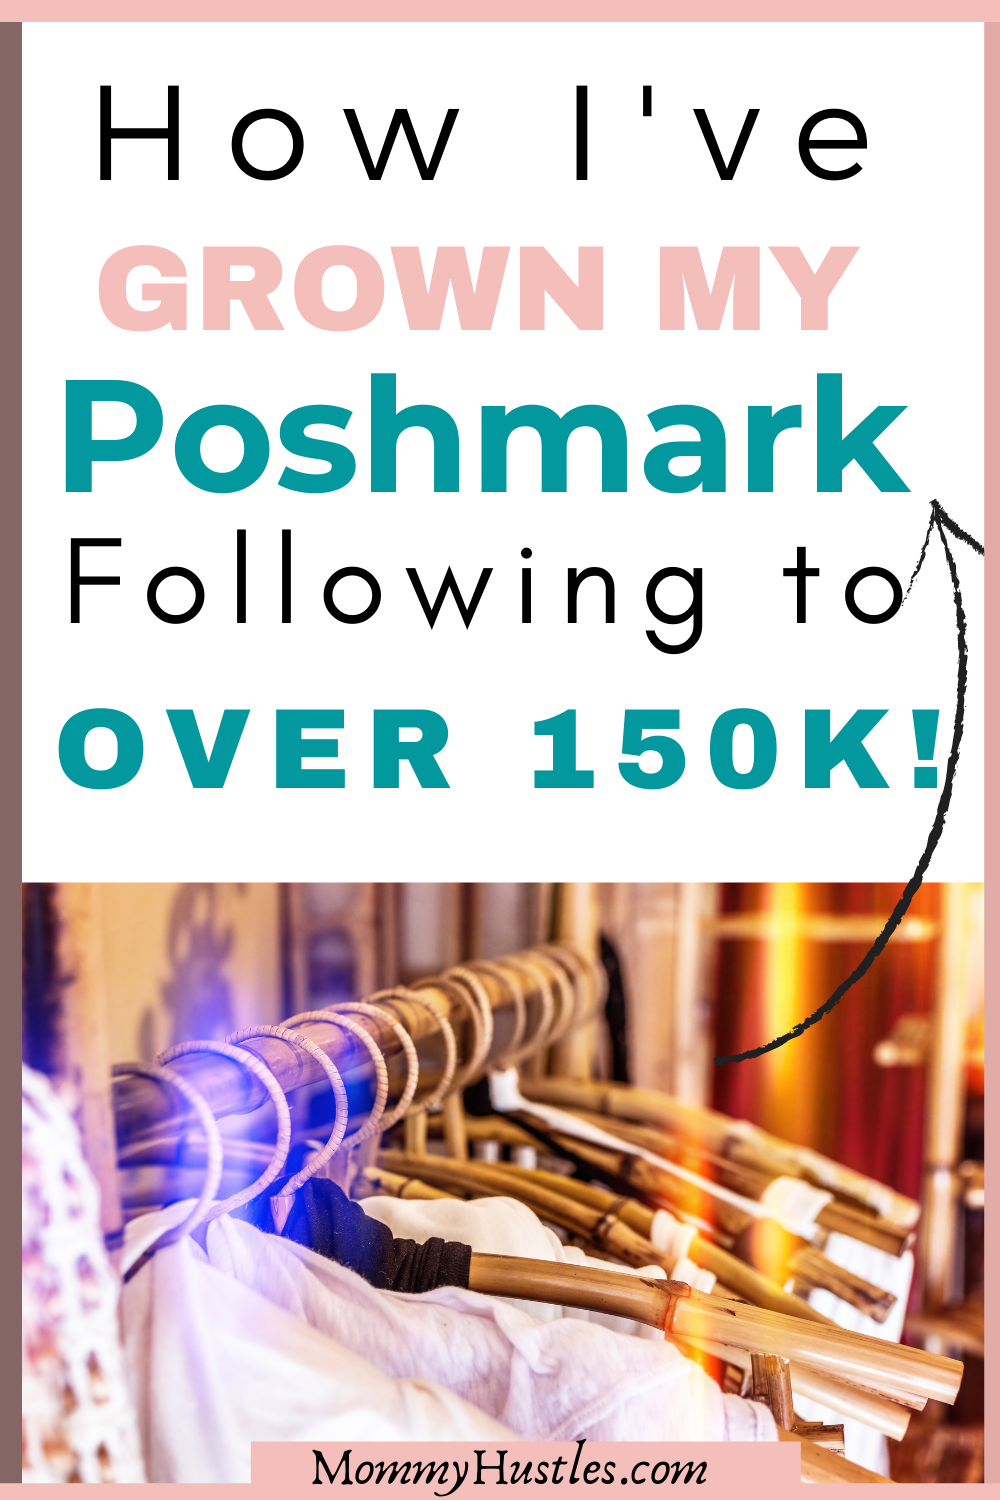 How I've Grown My Poshmark Following to Over 150K